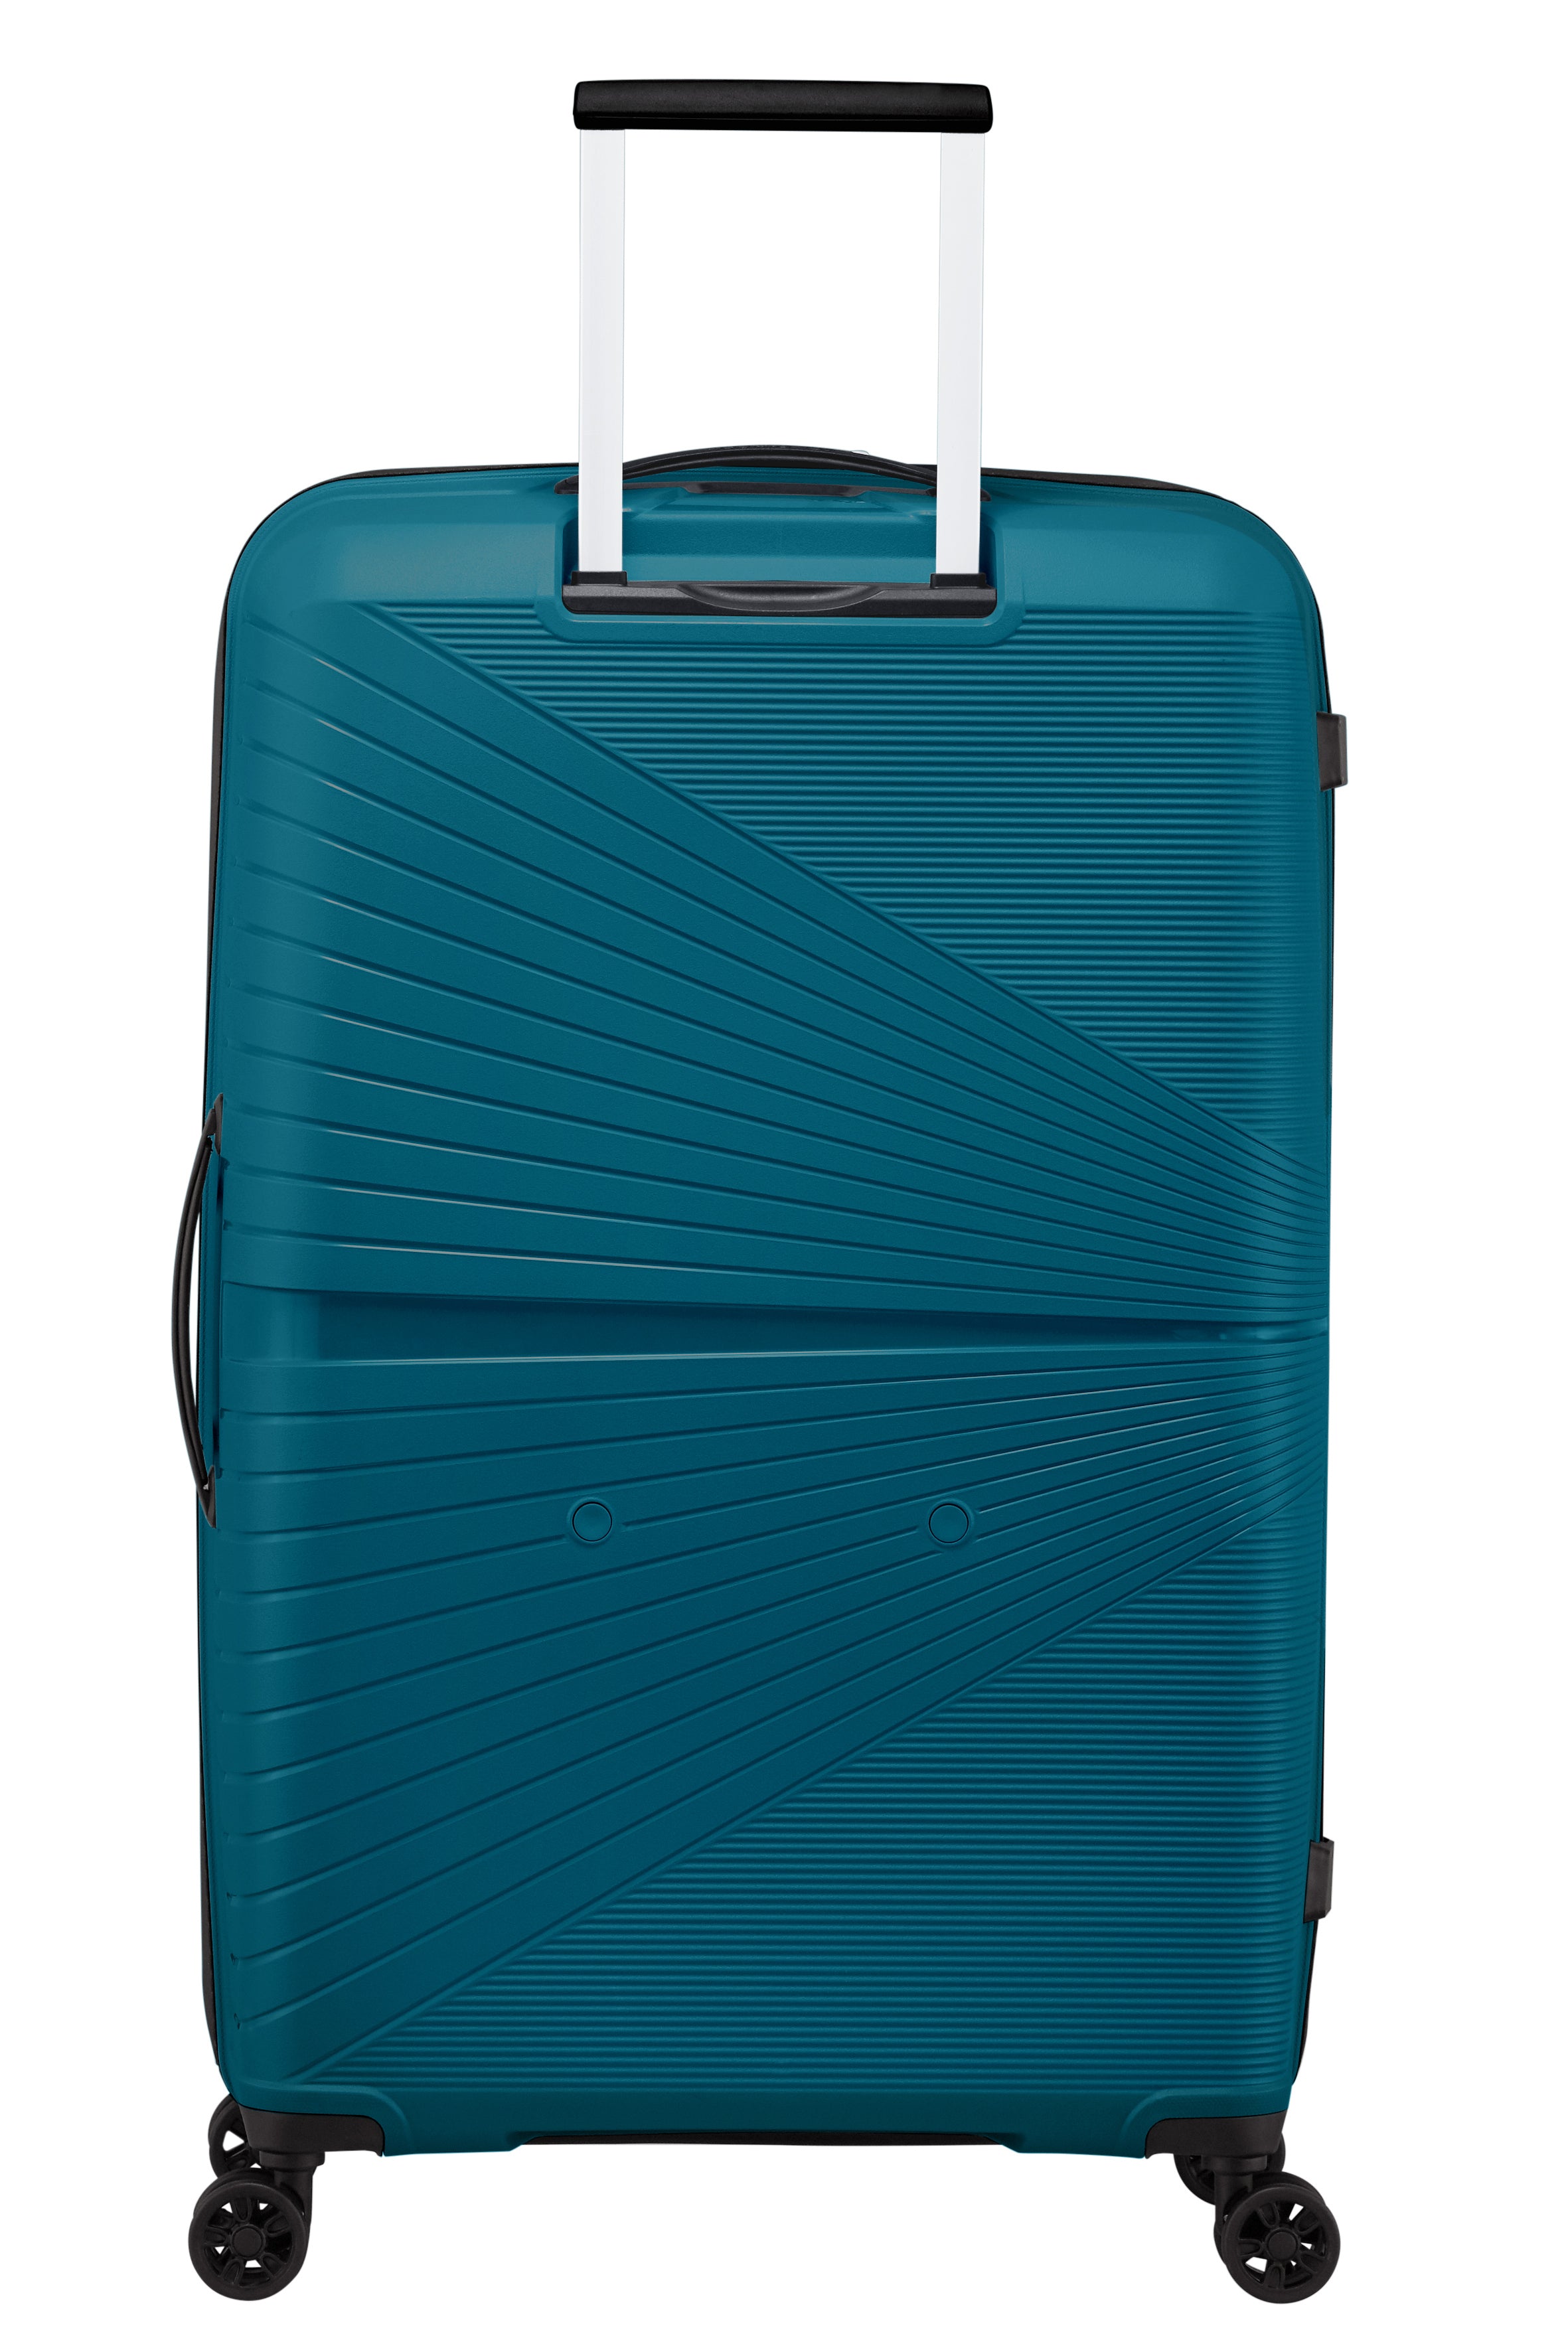 American Tourister - Airconic 77cm Large Suitcase - Deep Ocean-4